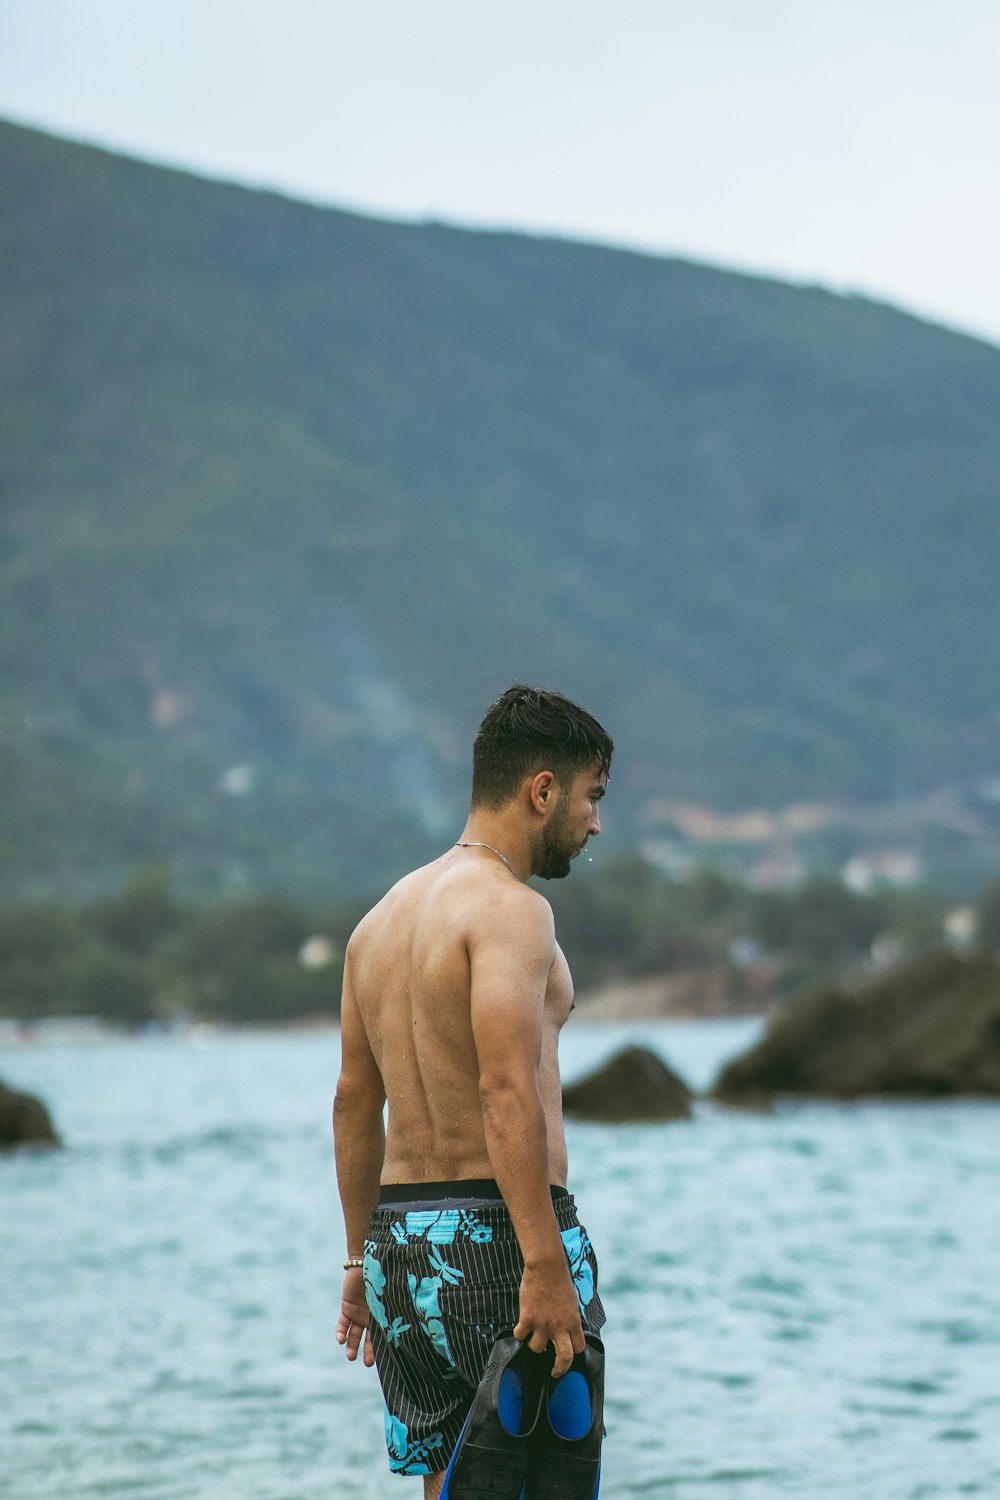 a shirtless man standing on a beach next to a body of water